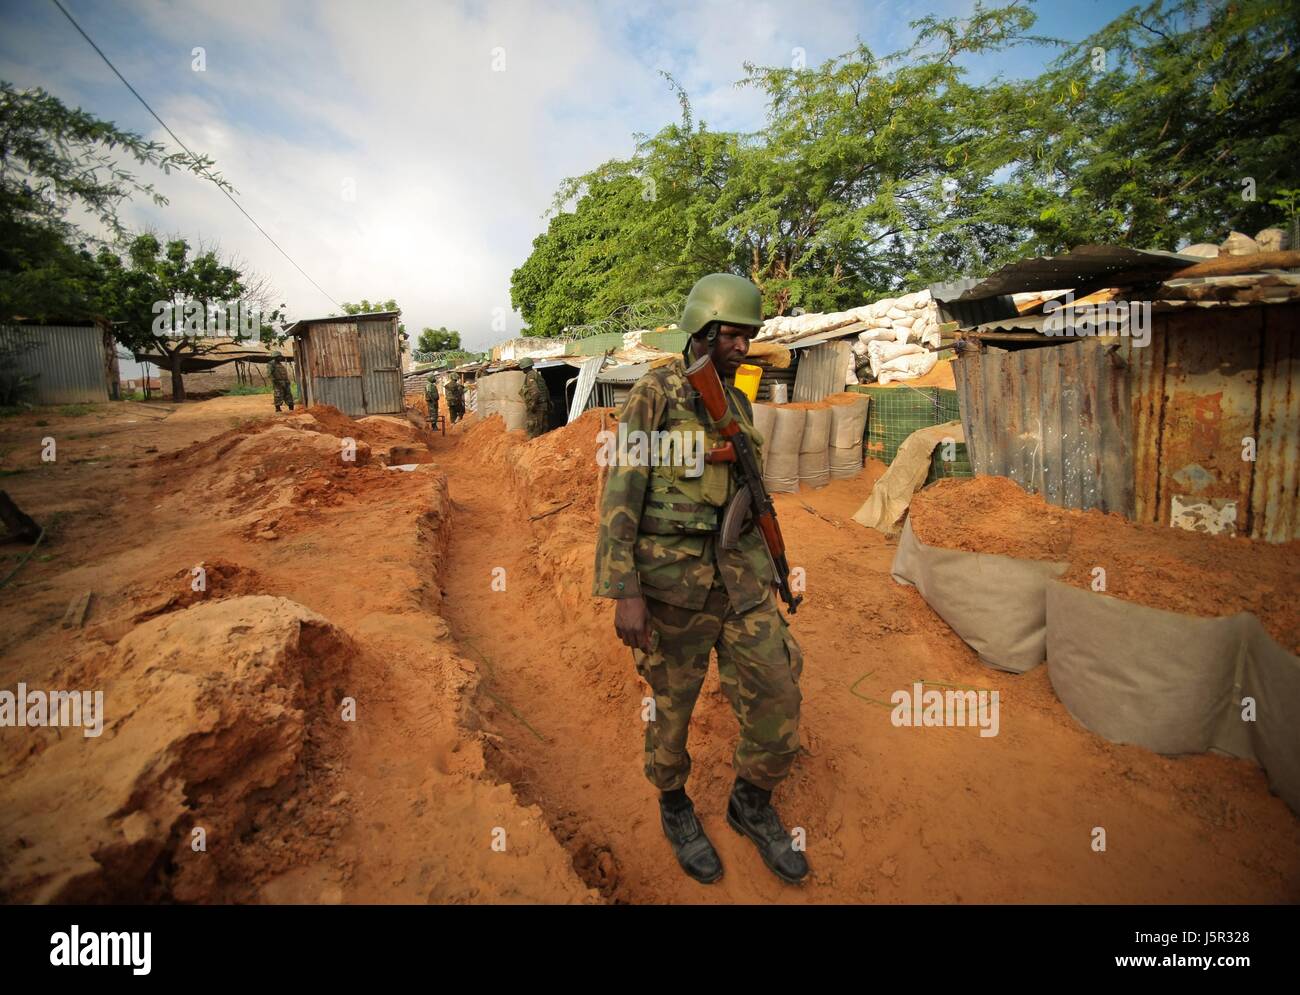 An African Union Mission in Somalia (AMISOM) Ugandan soldier walks through a trench along the frontline of the Yaaqshiid District, where AMISOM forces have pushed Al Shabaab militants November 23, 2011 near Mogadishu, Somalia.     (photo by Stuart Price/ANISOM via Planetpix) Stock Photo